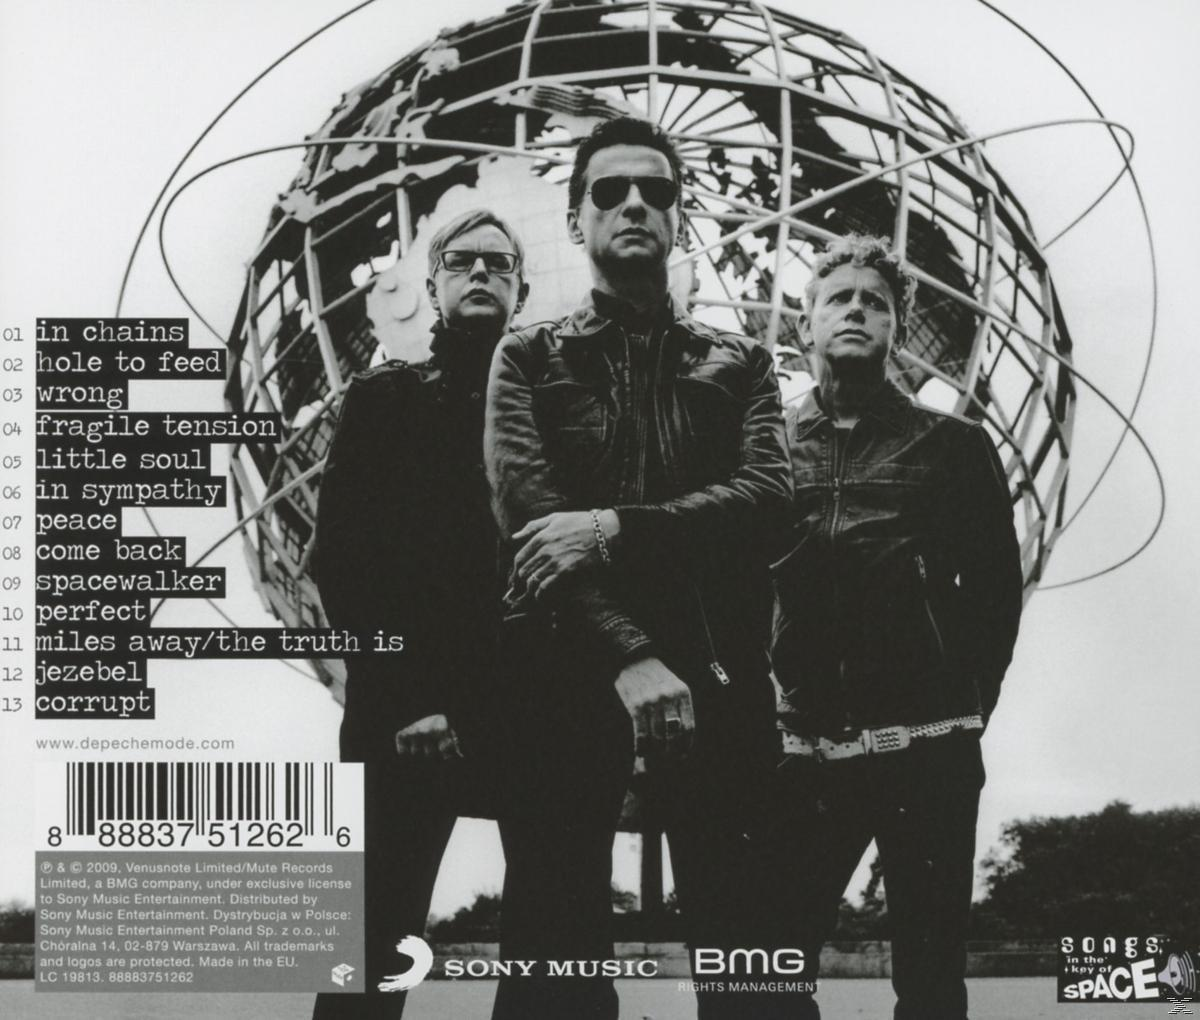 Depeche Mode - SOUNDS THE (CD) - OF UNIVERSE